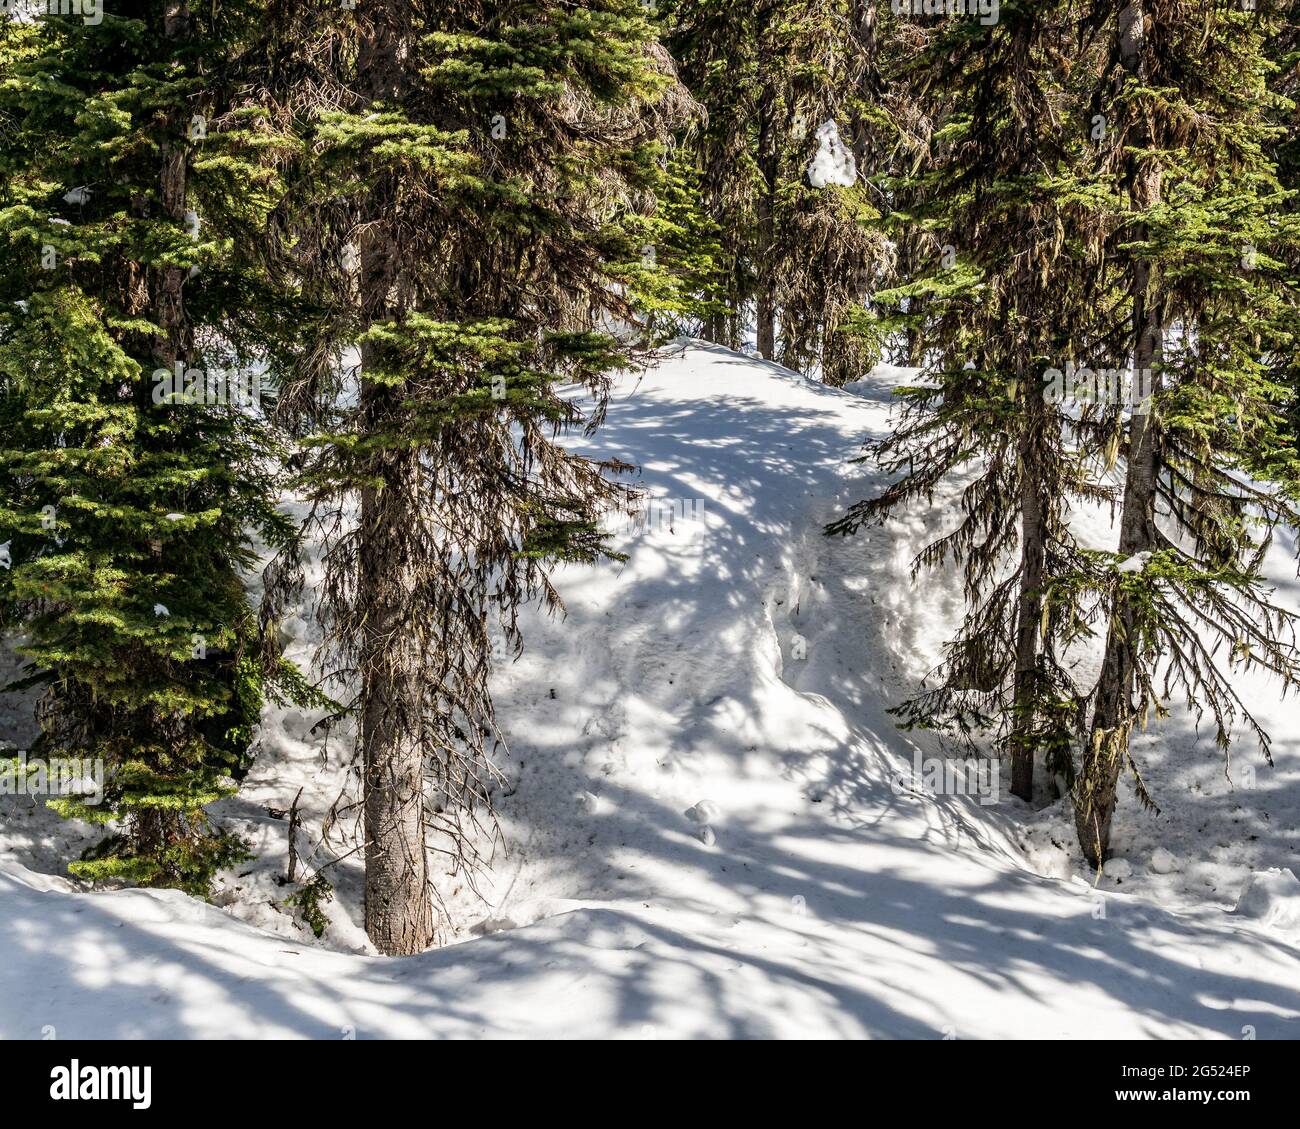 evergreen trees in a winter forest with fresh snow during sunny day Stock Photo